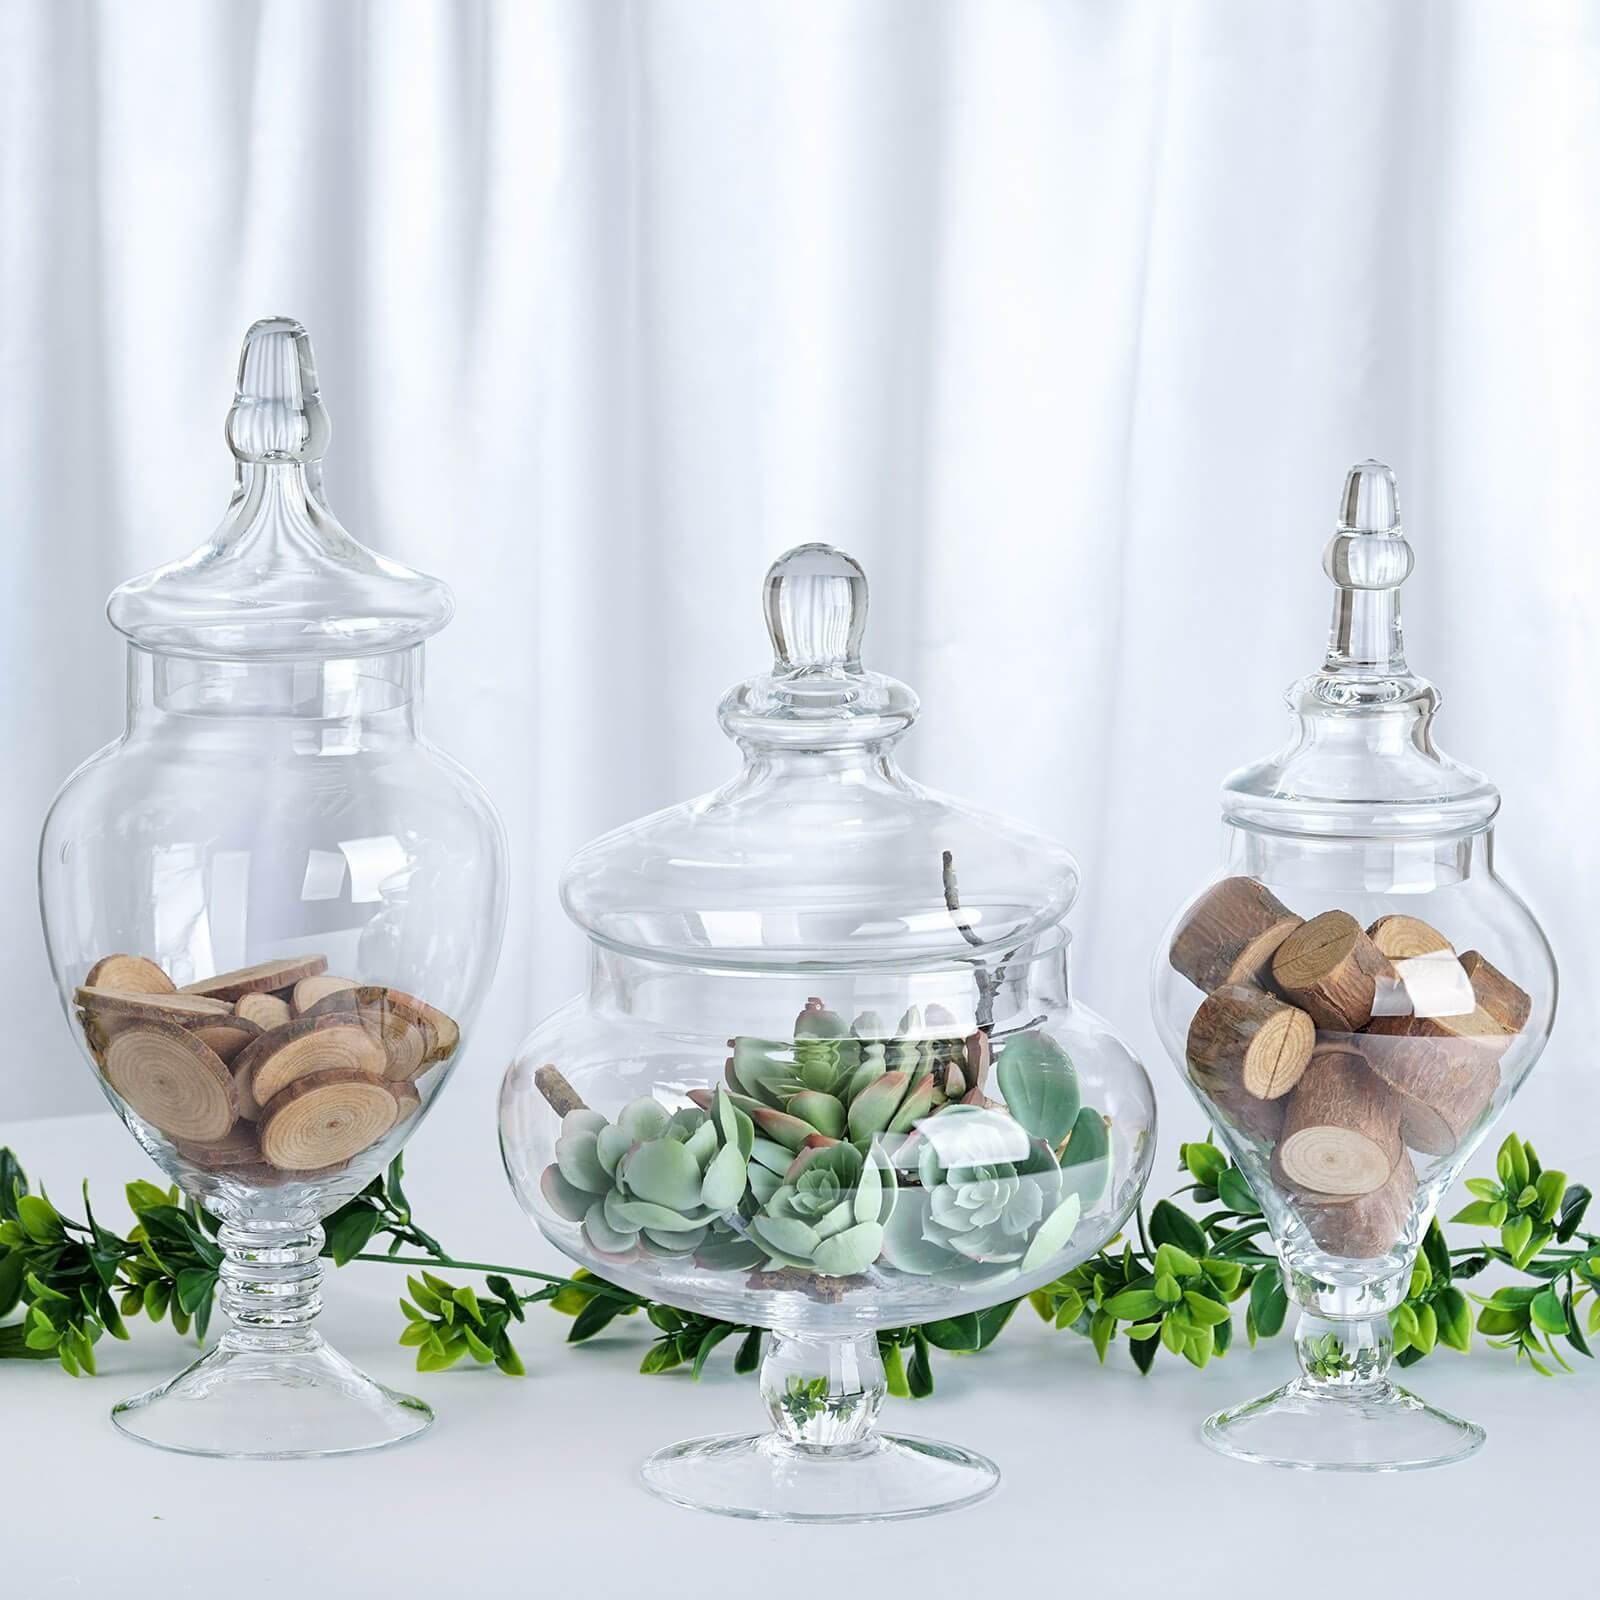 5 Pieces Glass Apothecary Jars with Lids Large Candy Buffet Display  Decorative Jars Clear Storage Jars Candy Bar Organizer Canisters for  Kitchen